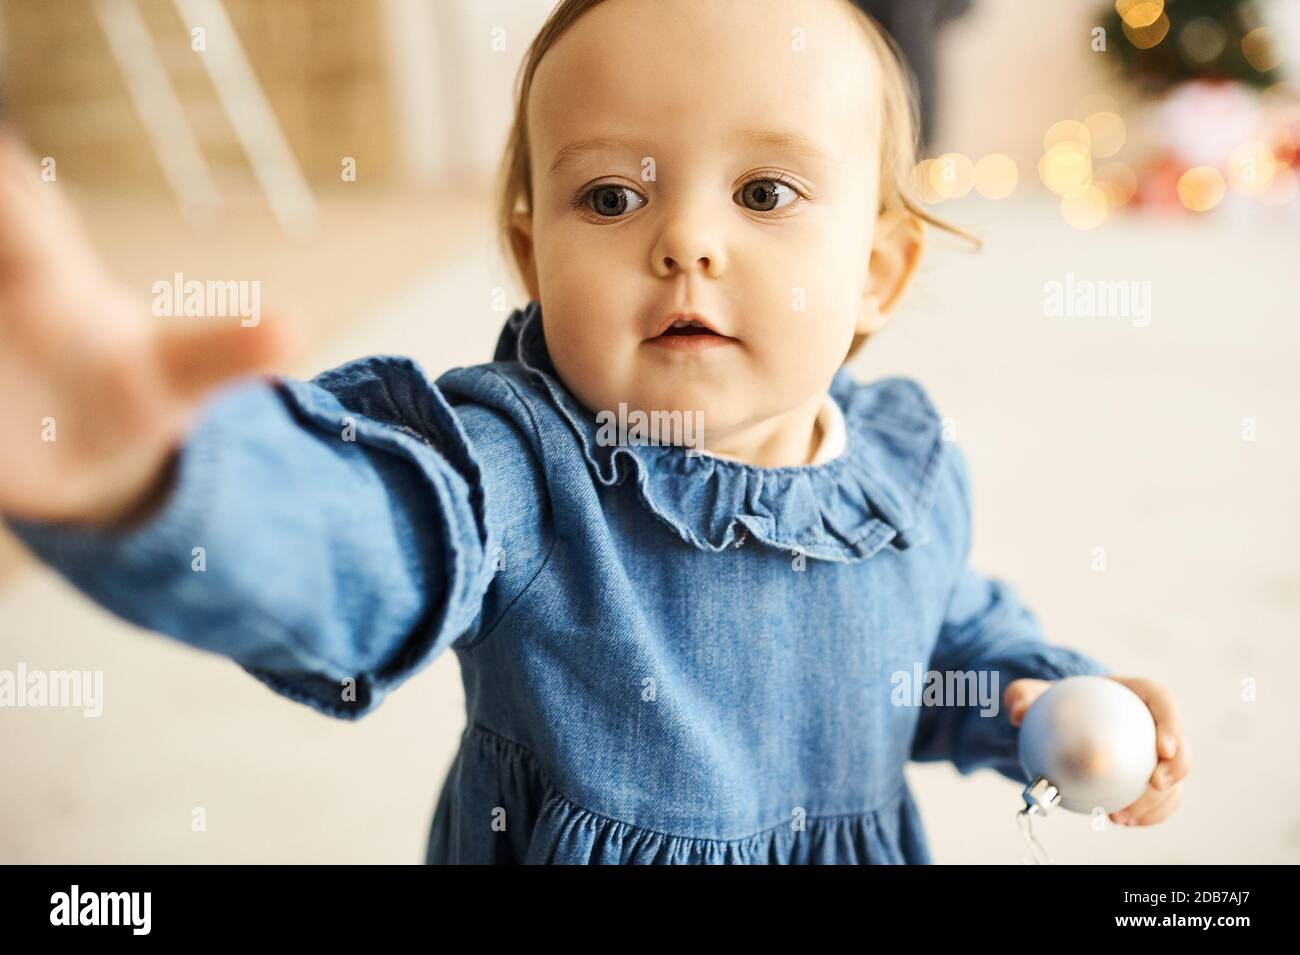 Portrait of a little baby girl dressed in a blue denim dress standing in a bright room. Stock Photo